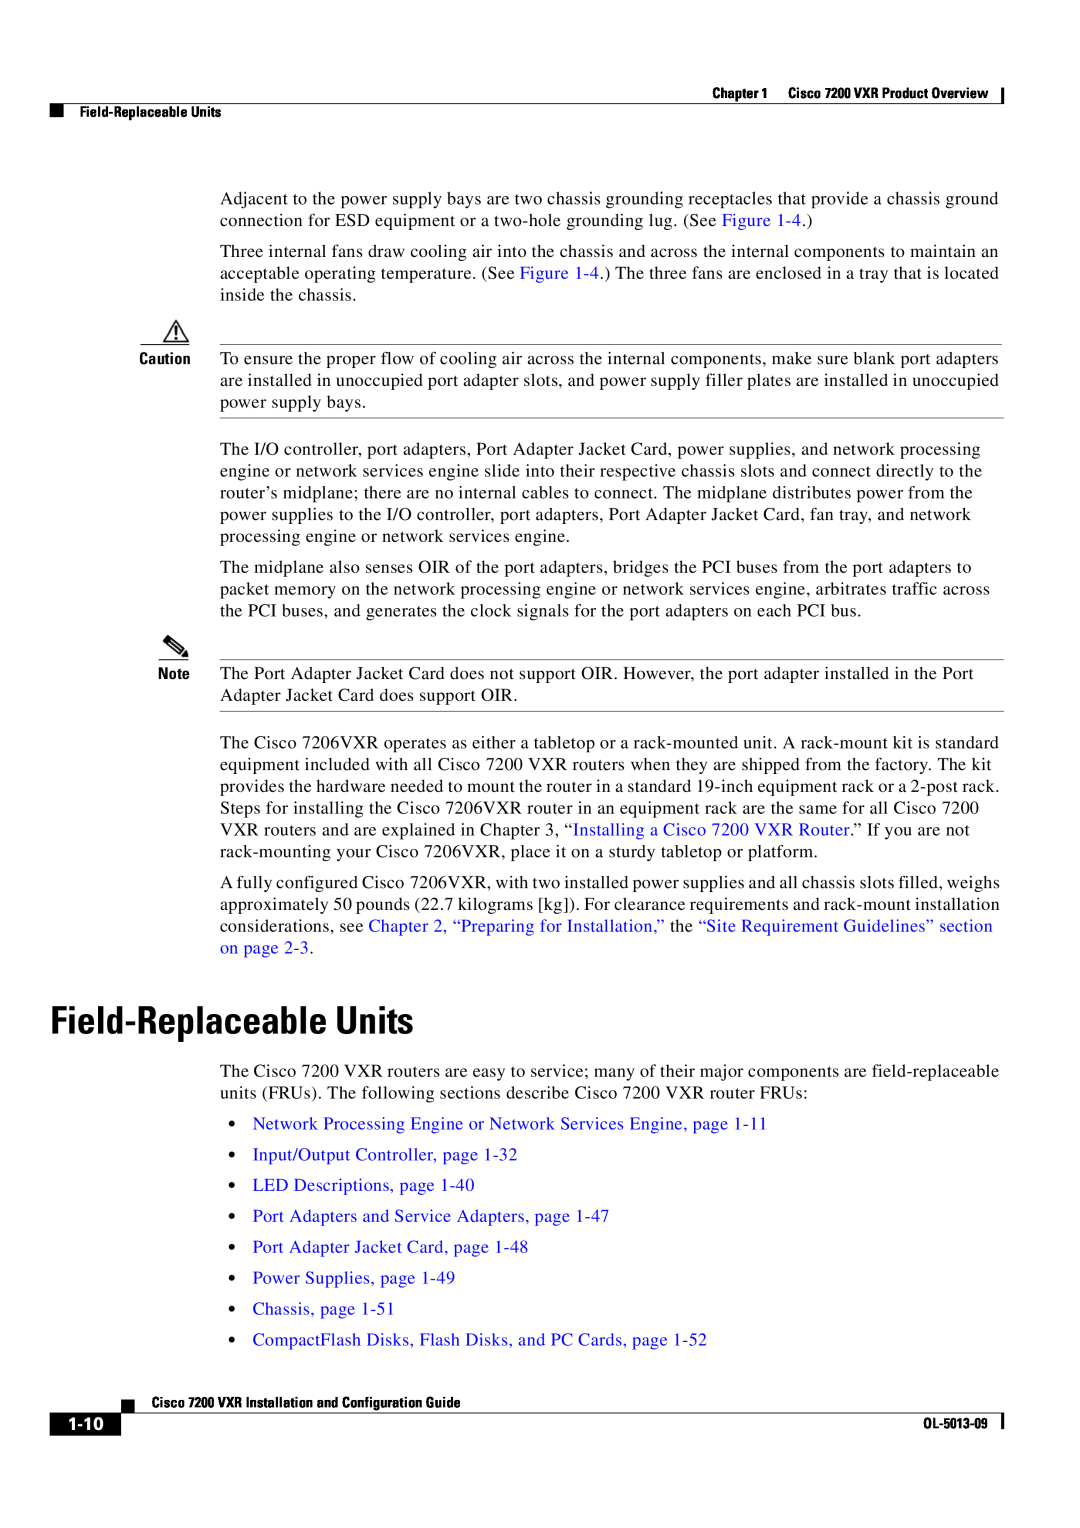 Cisco Systems 7200 VXR manual Field-Replaceable Units, Network Processing Engine or Network Services Engine, page, 1-10 